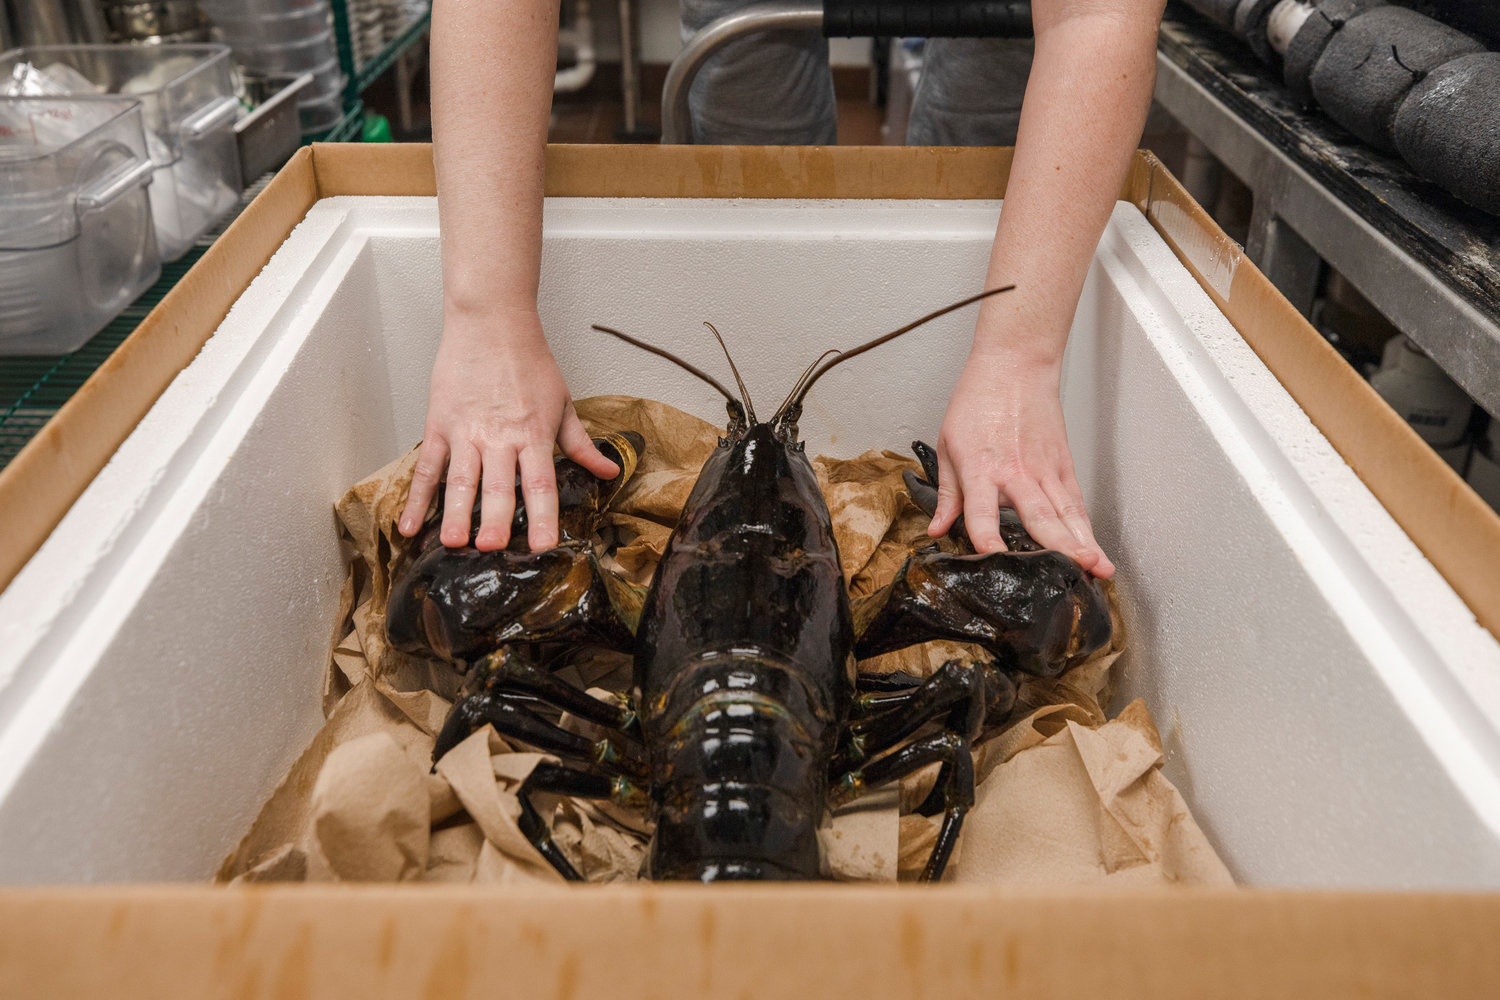 According to NOAA Fisheries, there is no official way to determine the exact age of a lobster, but scientists think based on research into body size and age that the maximum age they reach approaches 100 years. Aquarium studies suggest a 1-pound lobster is 5-7 years old.